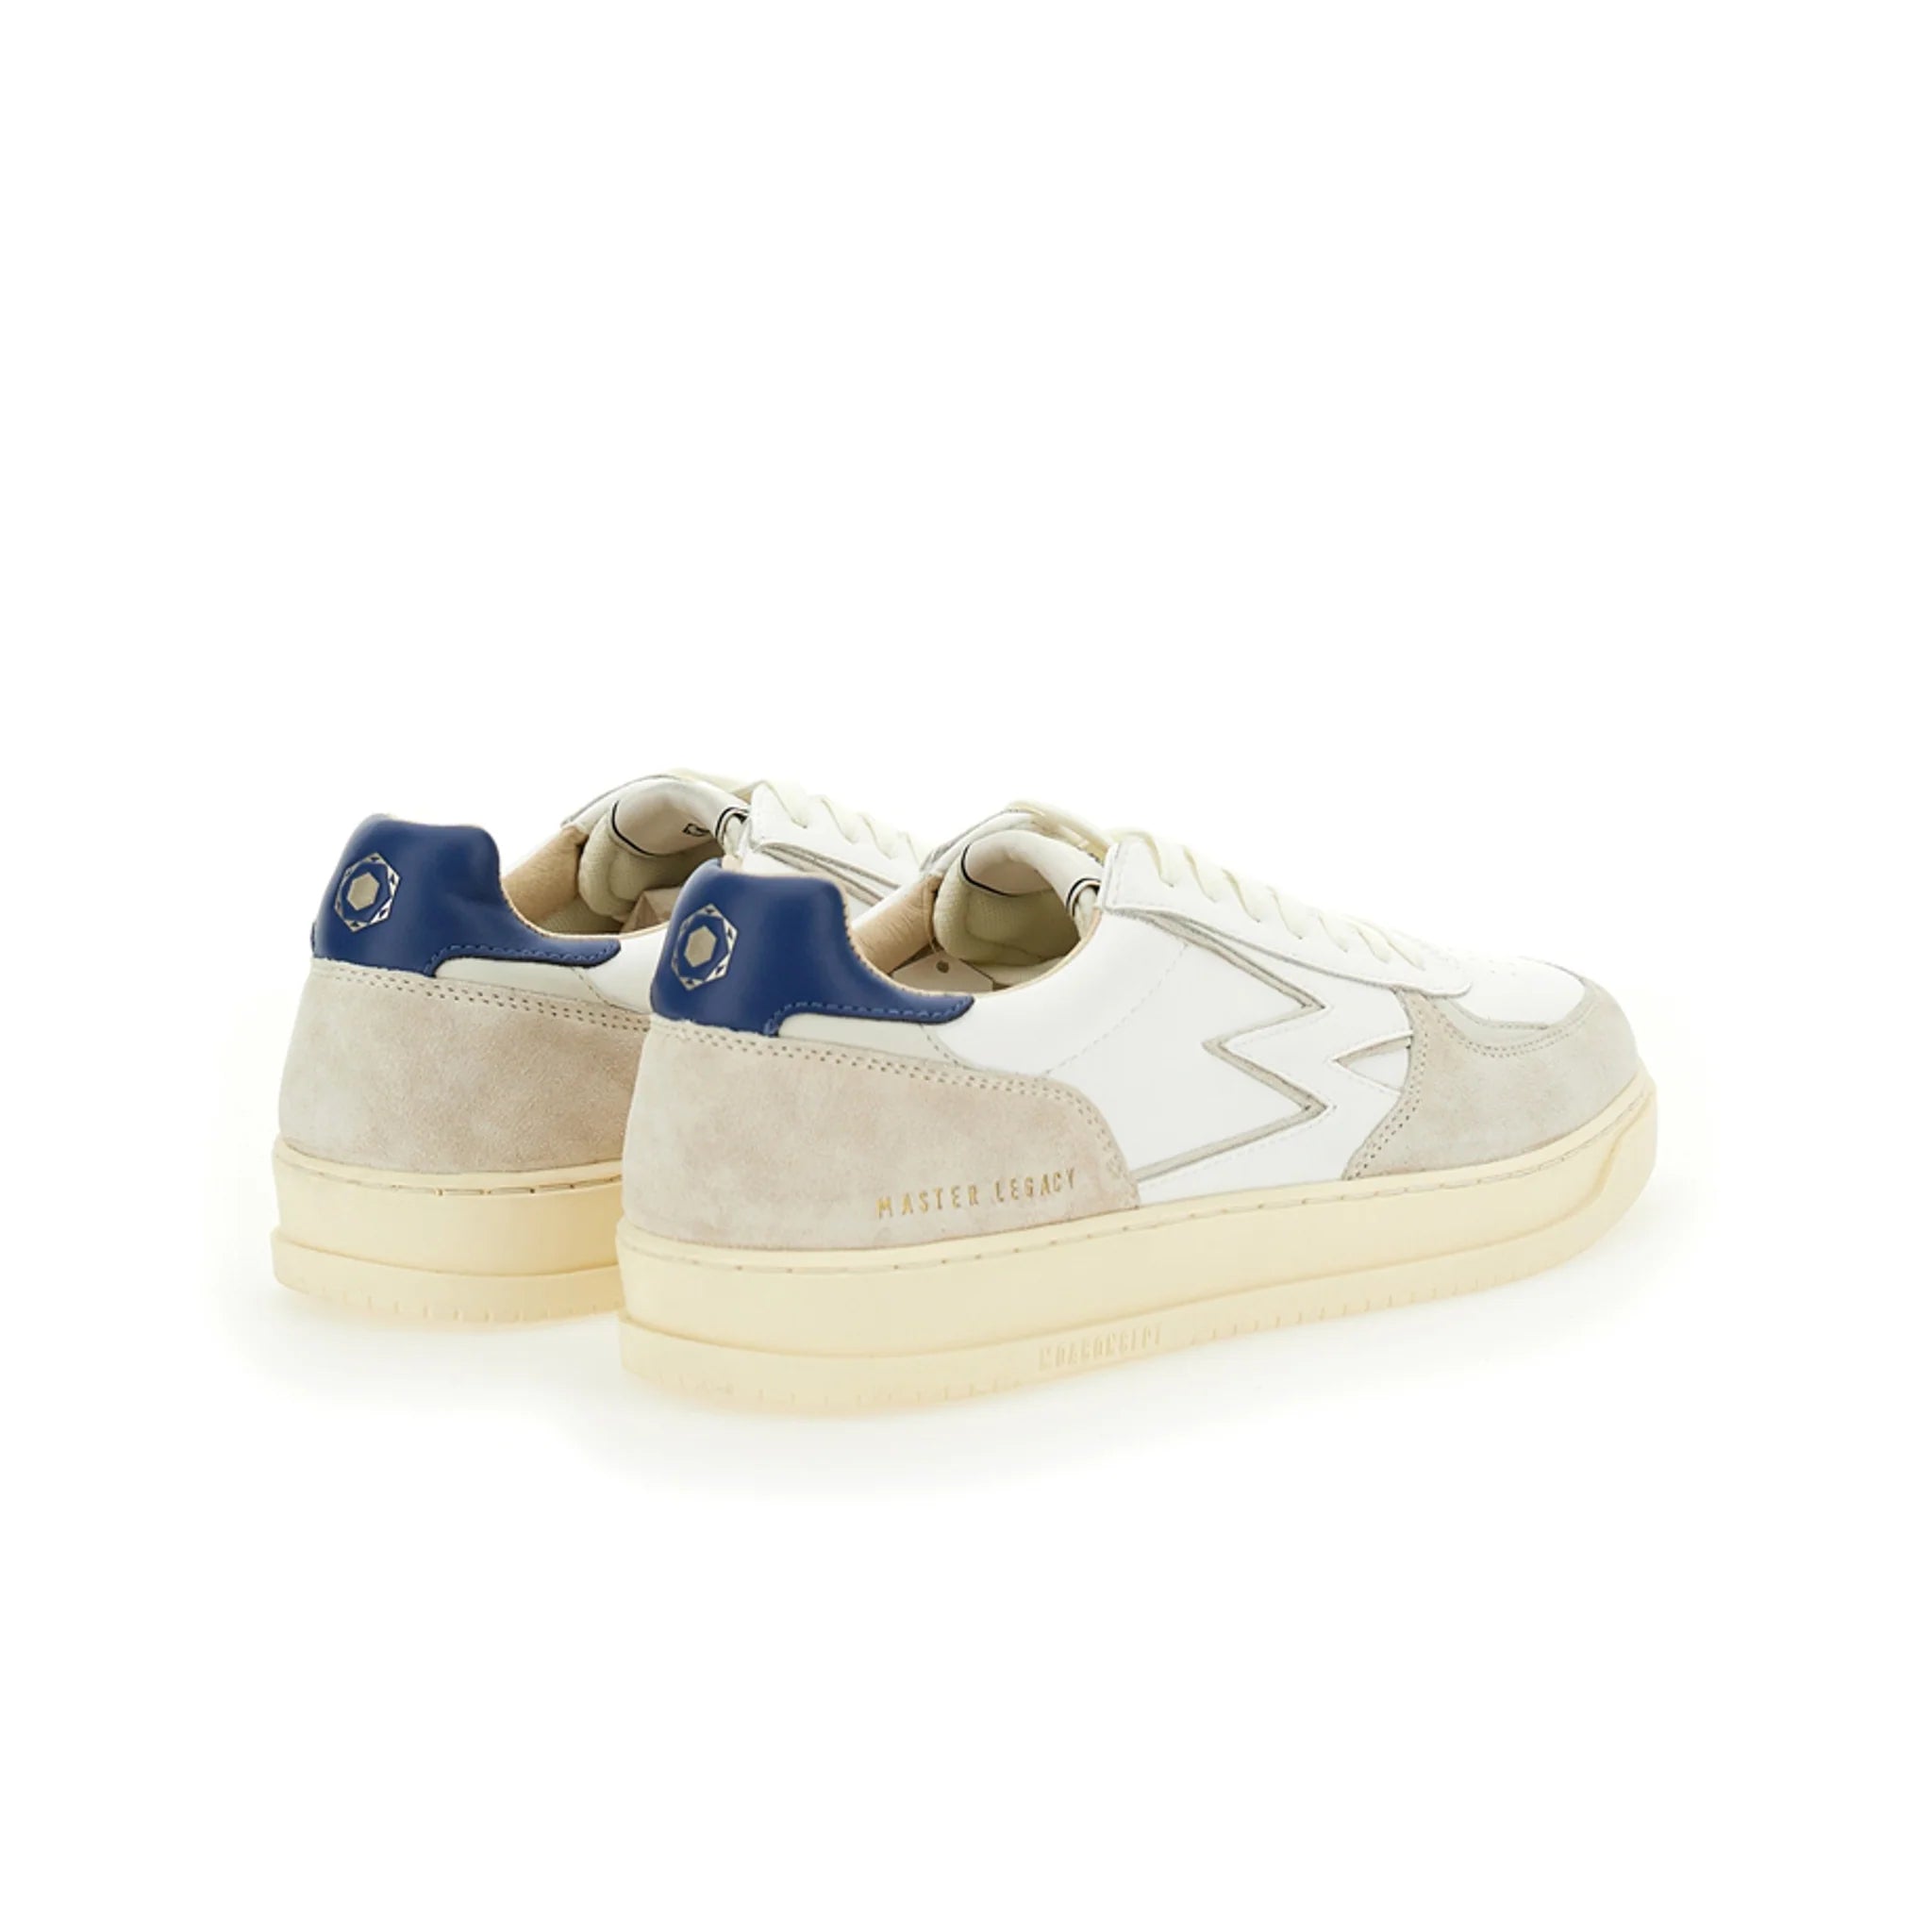 Sneakers Moaconcept Bianche e Blu (8652528550228)